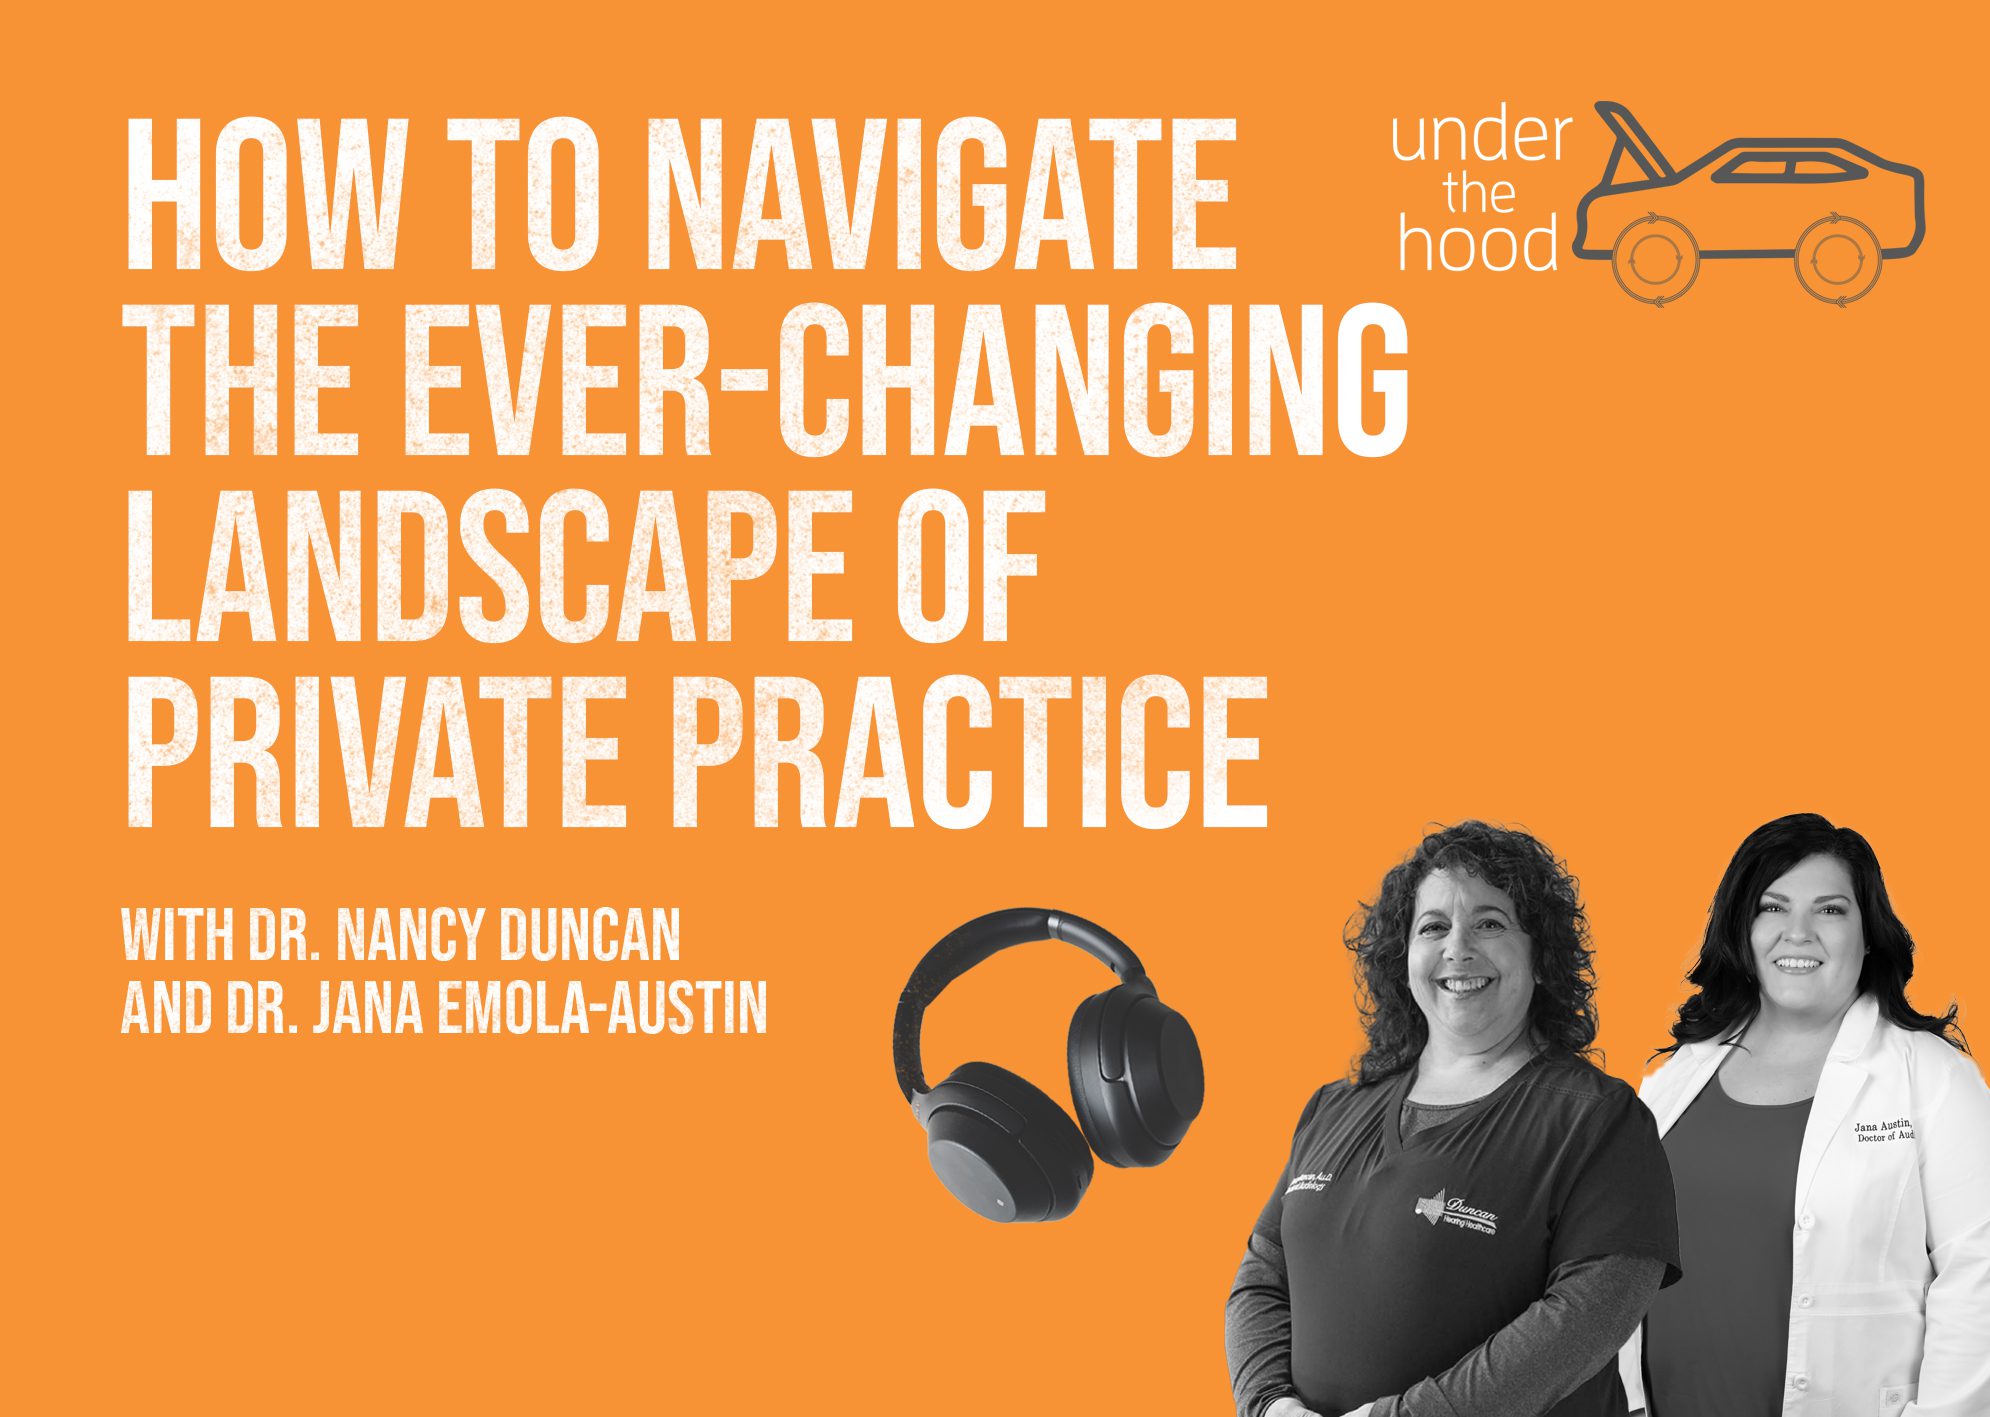 how to navigate the ever-changing landscape of private practice